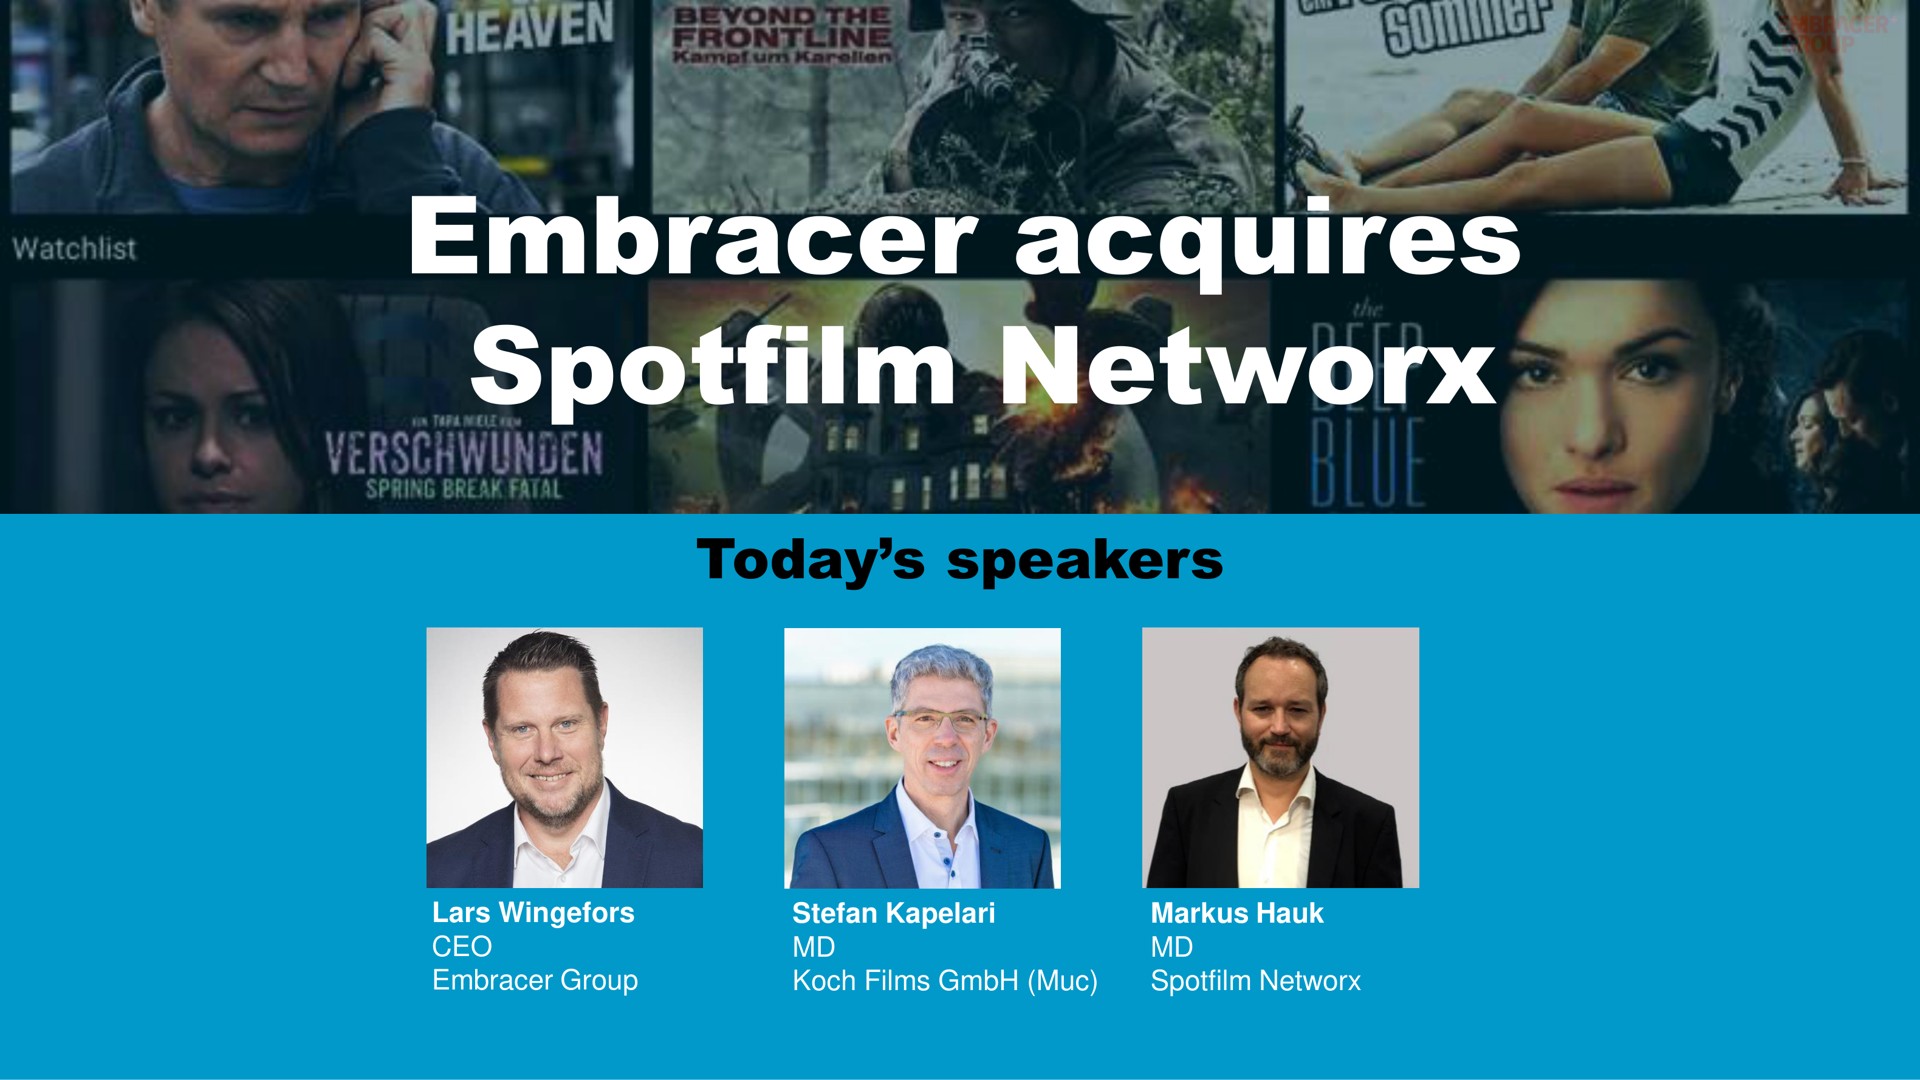 embracer acquires today speakers eas eye pink me a | Embracer Group